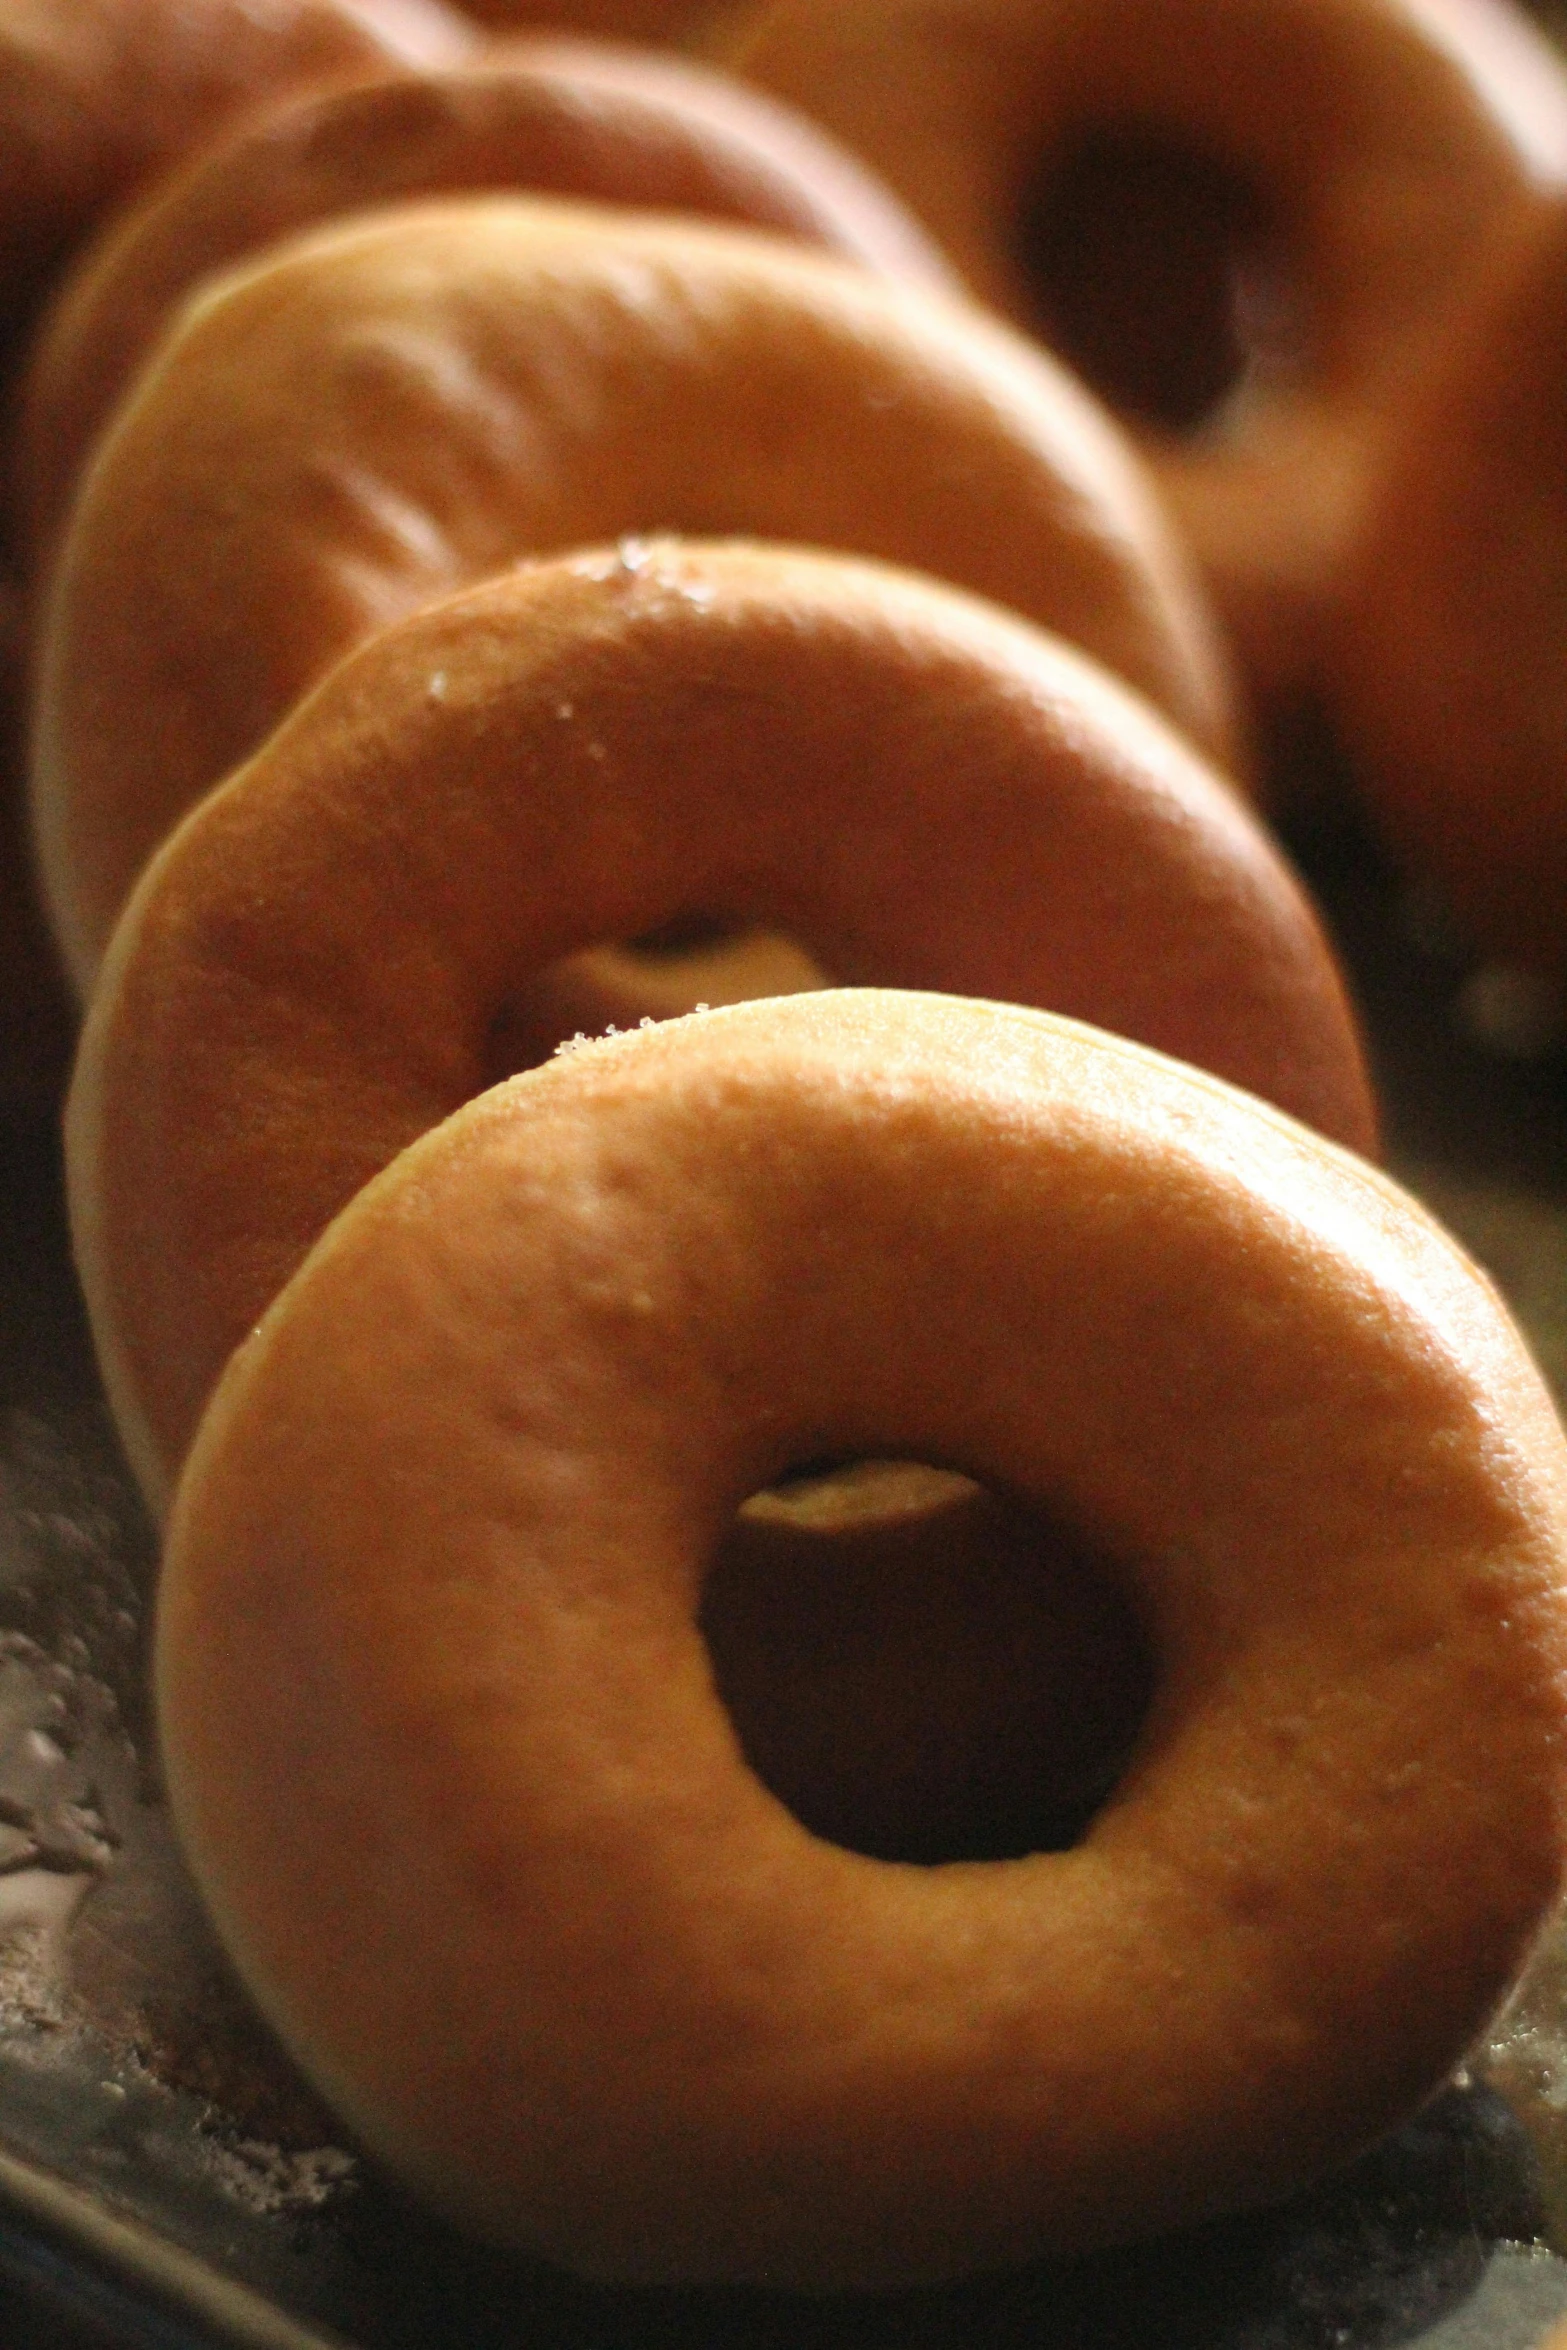 a close up of a tray of doughnuts, by Ben Zoeller, hurufiyya, null, chile, the photo shows a large, hires